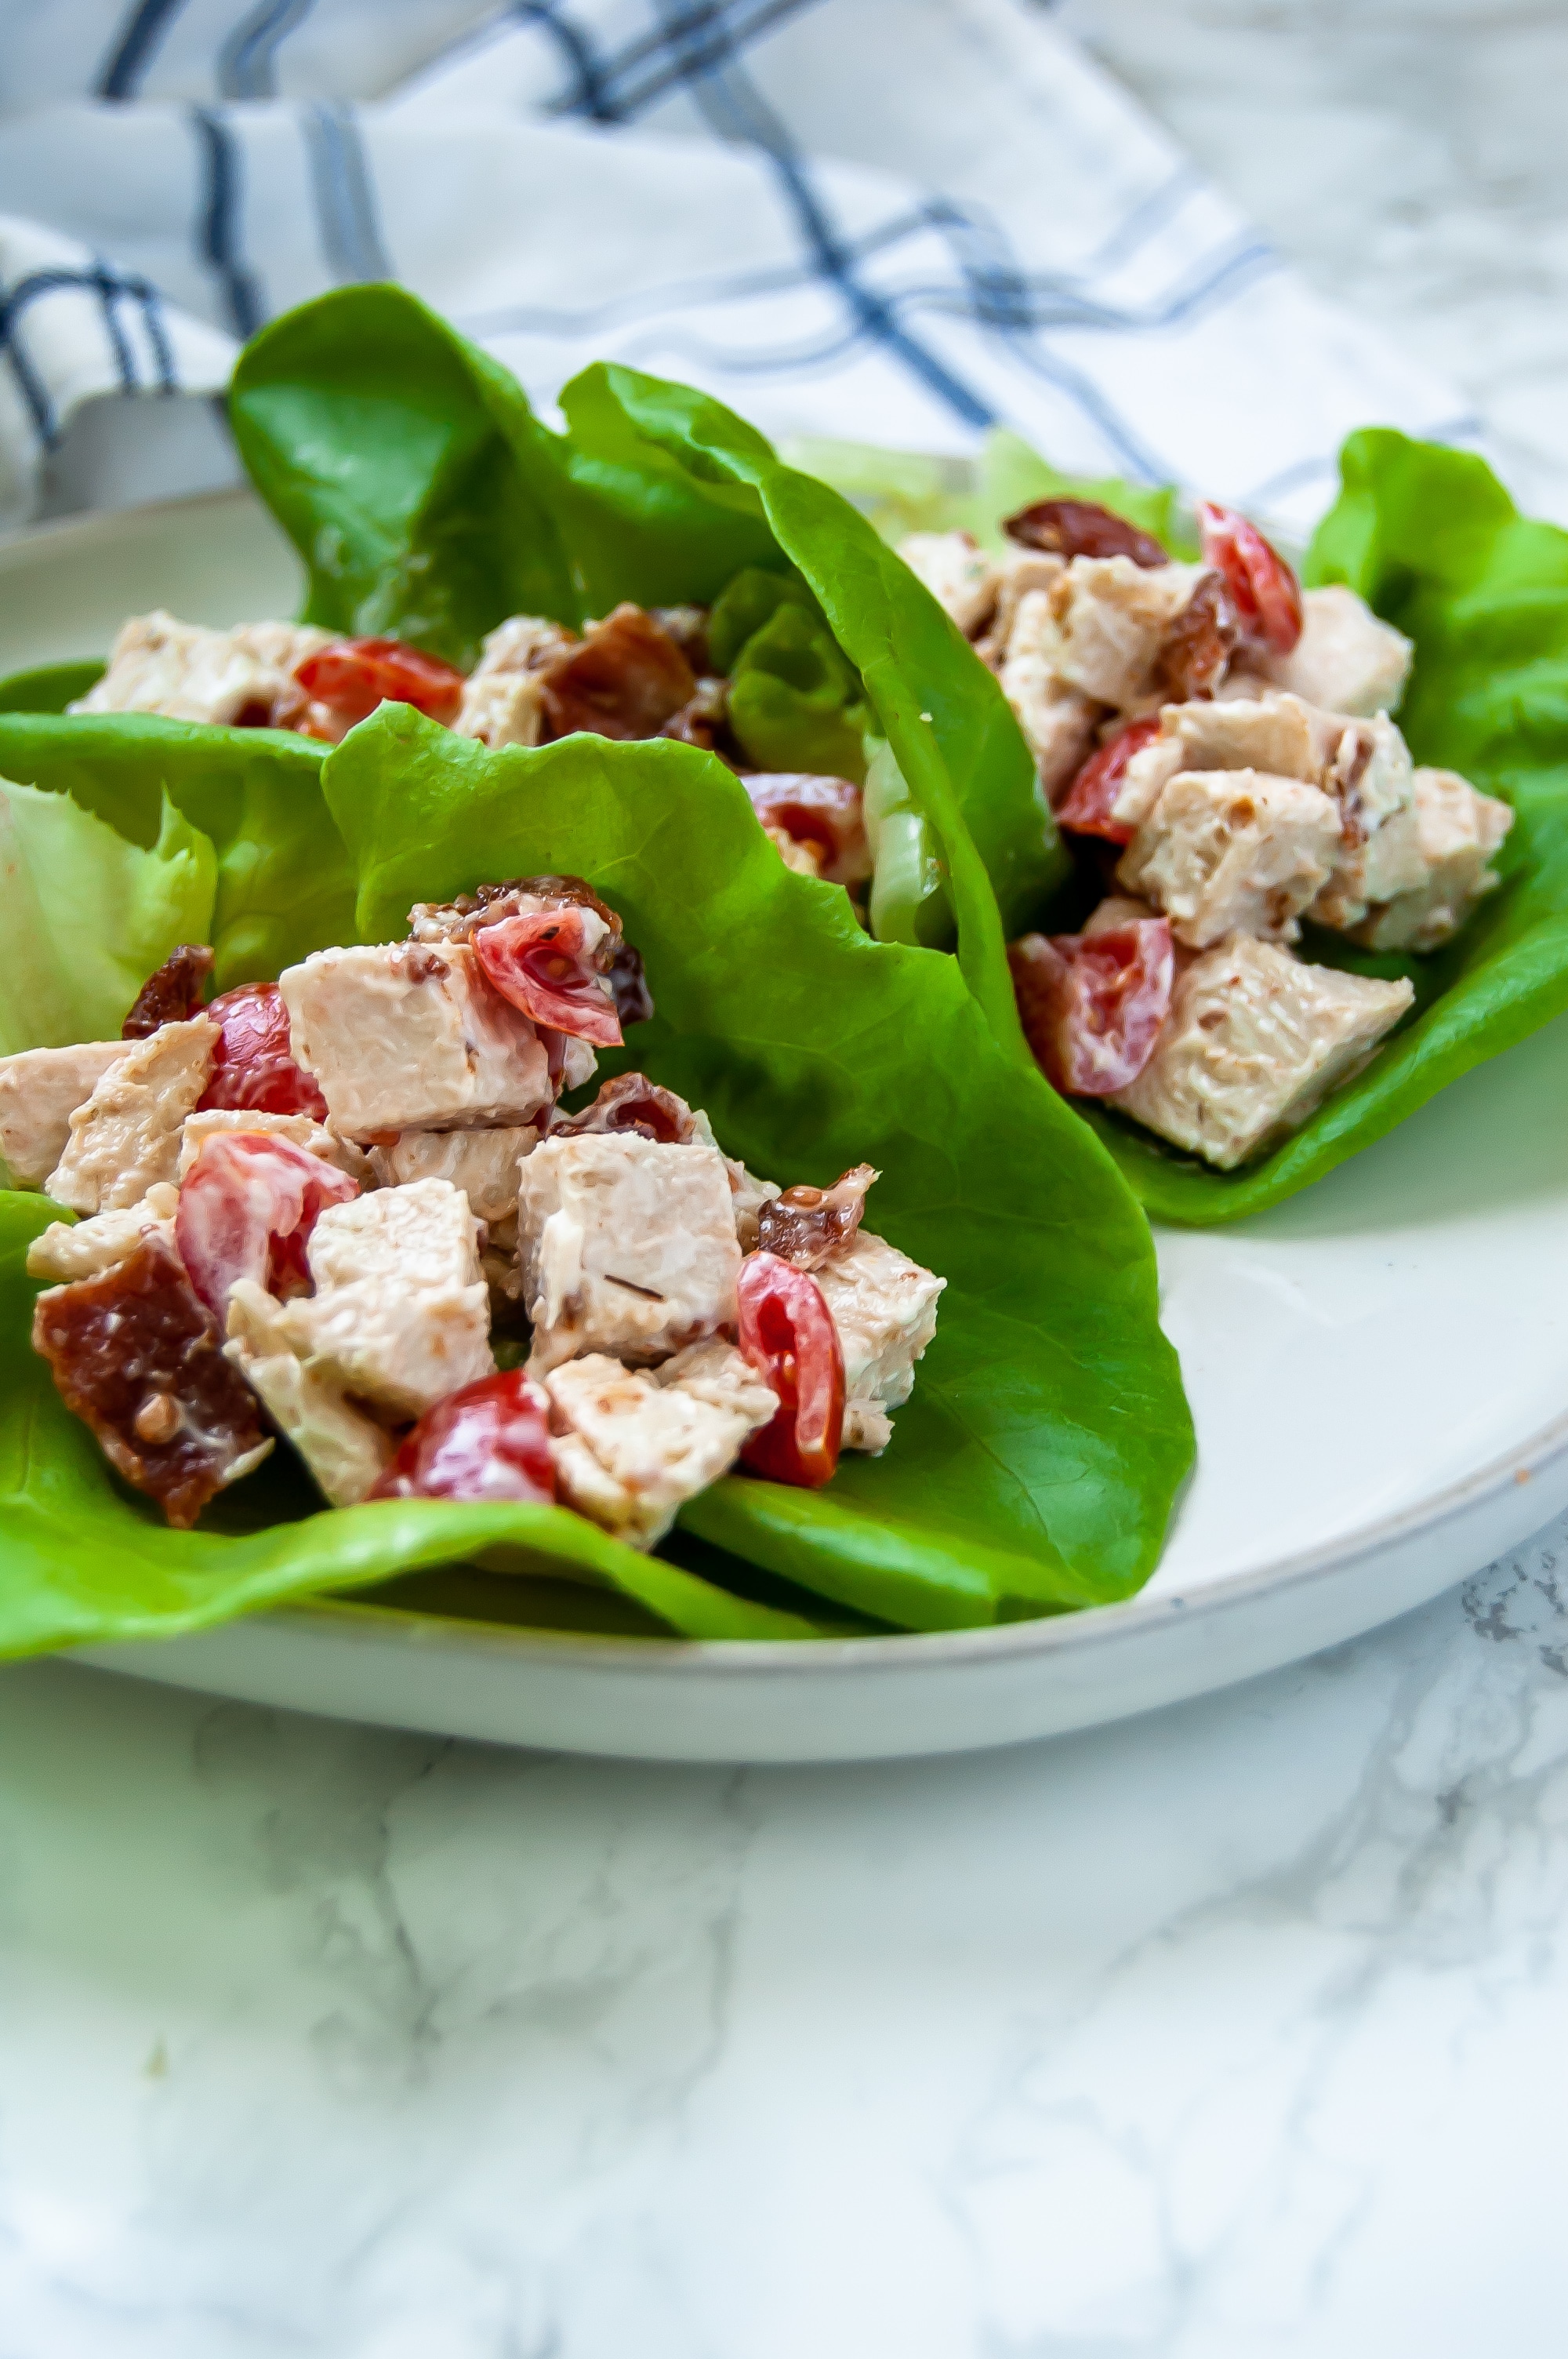 A plate with turkey lettuce BLT cups on it - there are three leaves of butter lettuce with a creamy turkey, bacon, tomato salad inside of them.